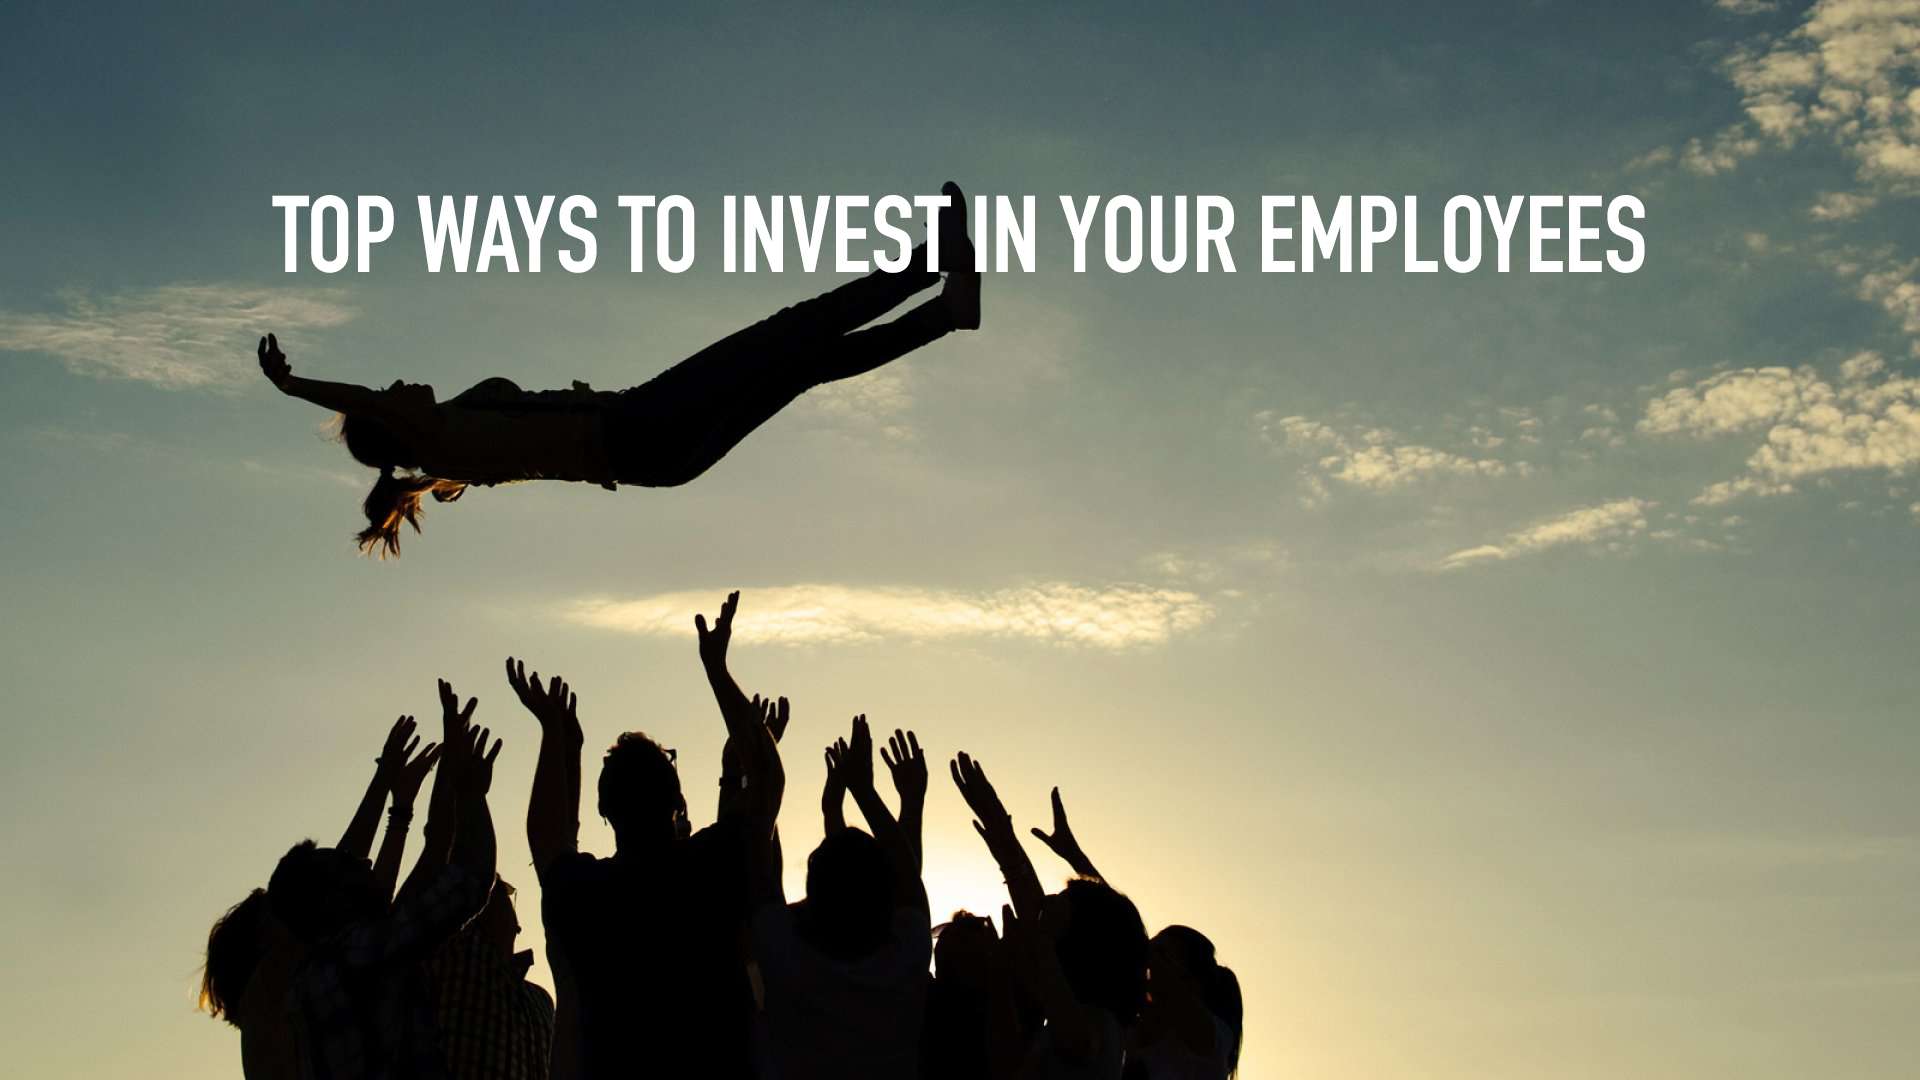 Top Ways To Invest In Your Employees